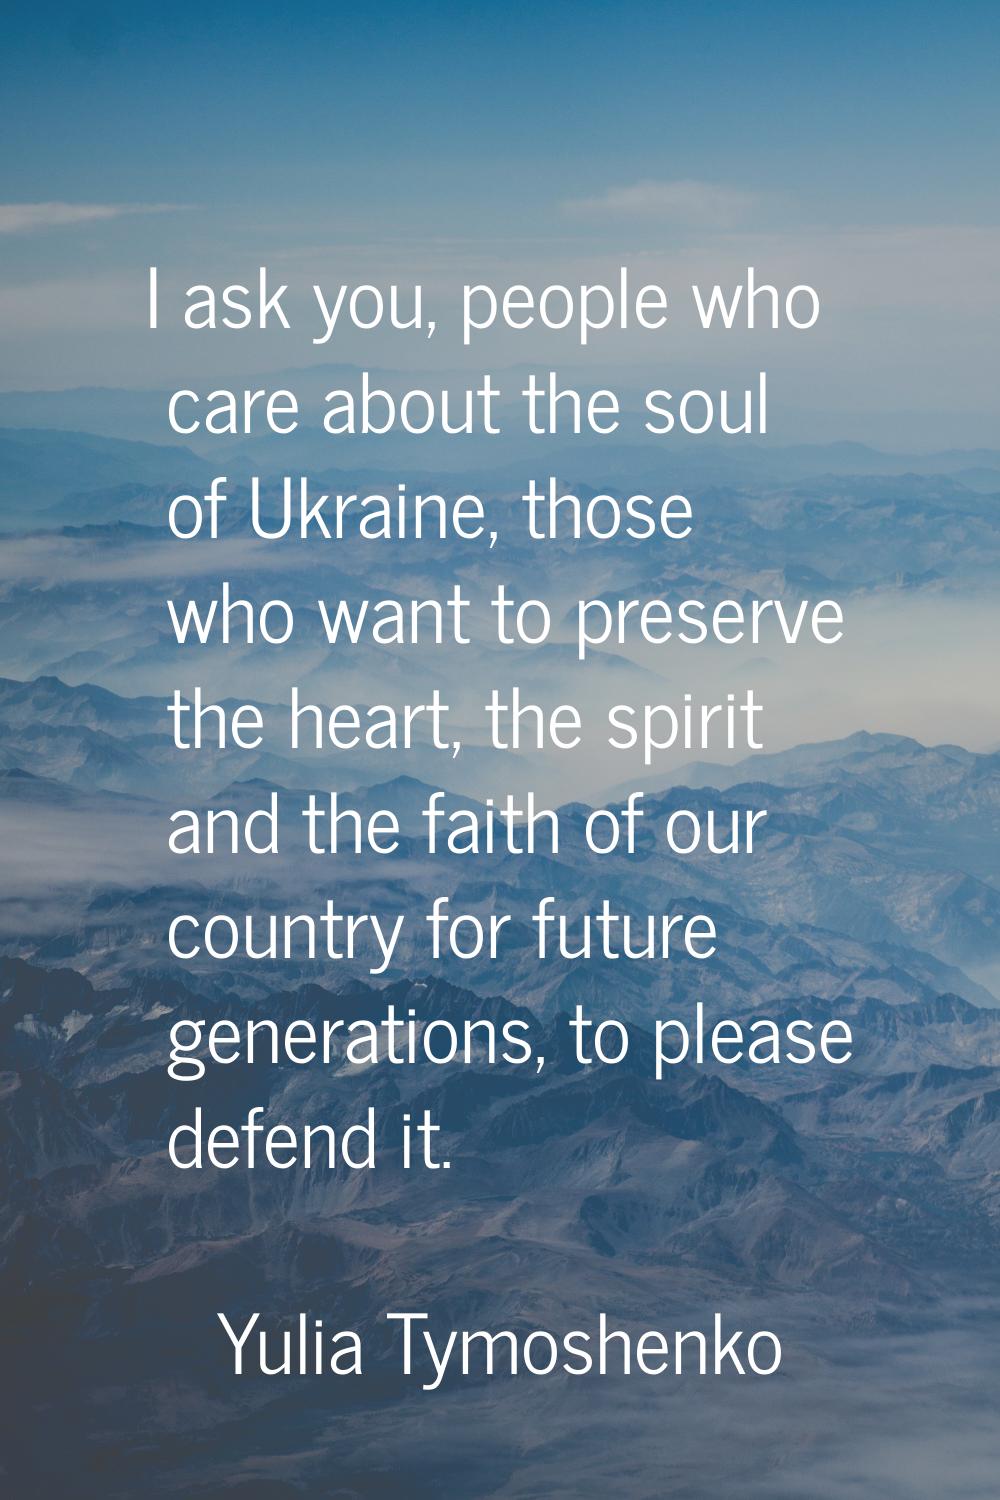 I ask you, people who care about the soul of Ukraine, those who want to preserve the heart, the spi